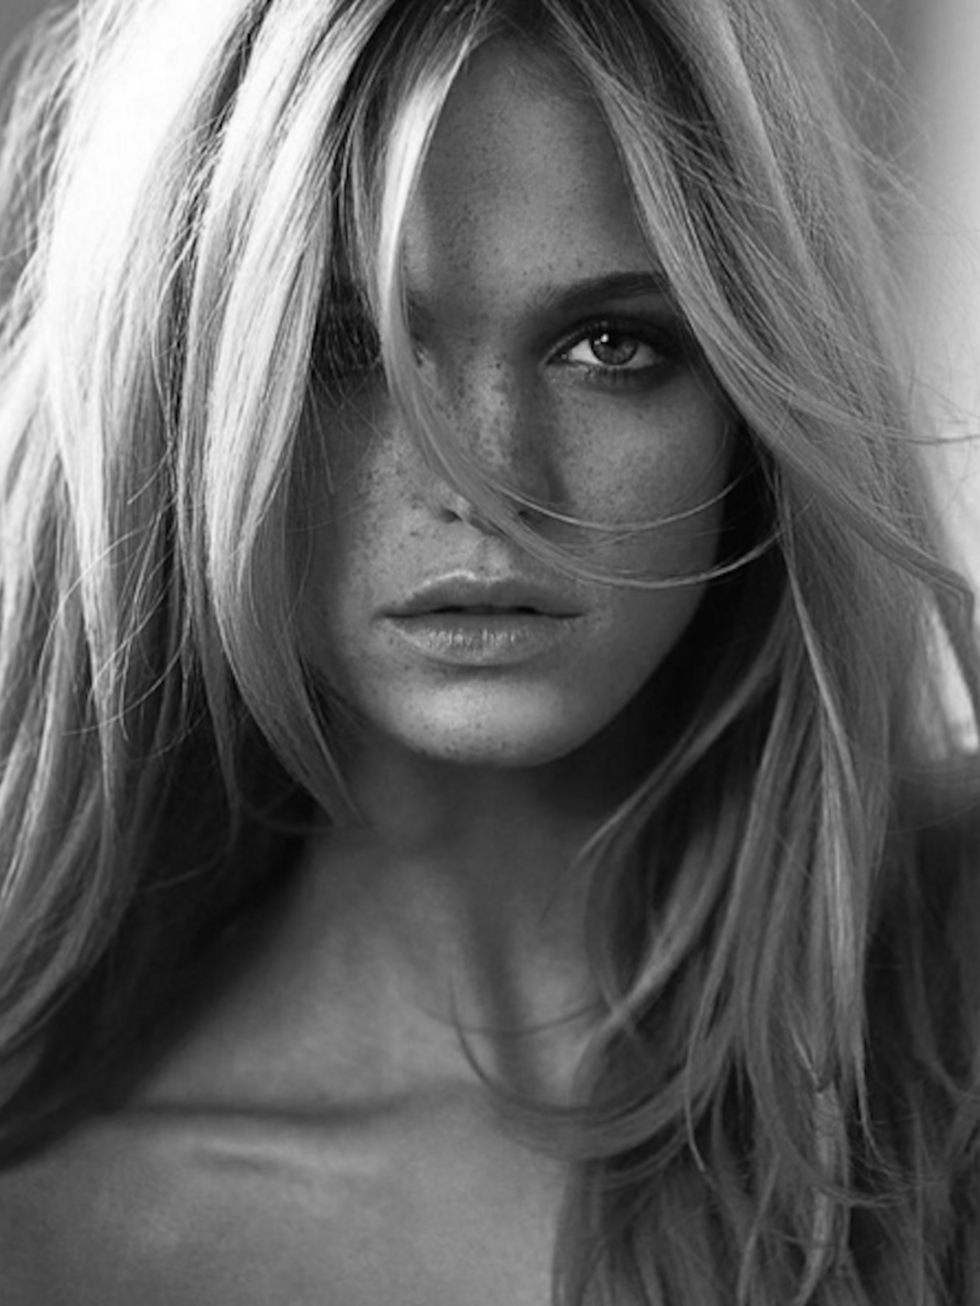 Victoria's Secret Angel Erin Heatherton has an entirely covetable face, don't you agree?